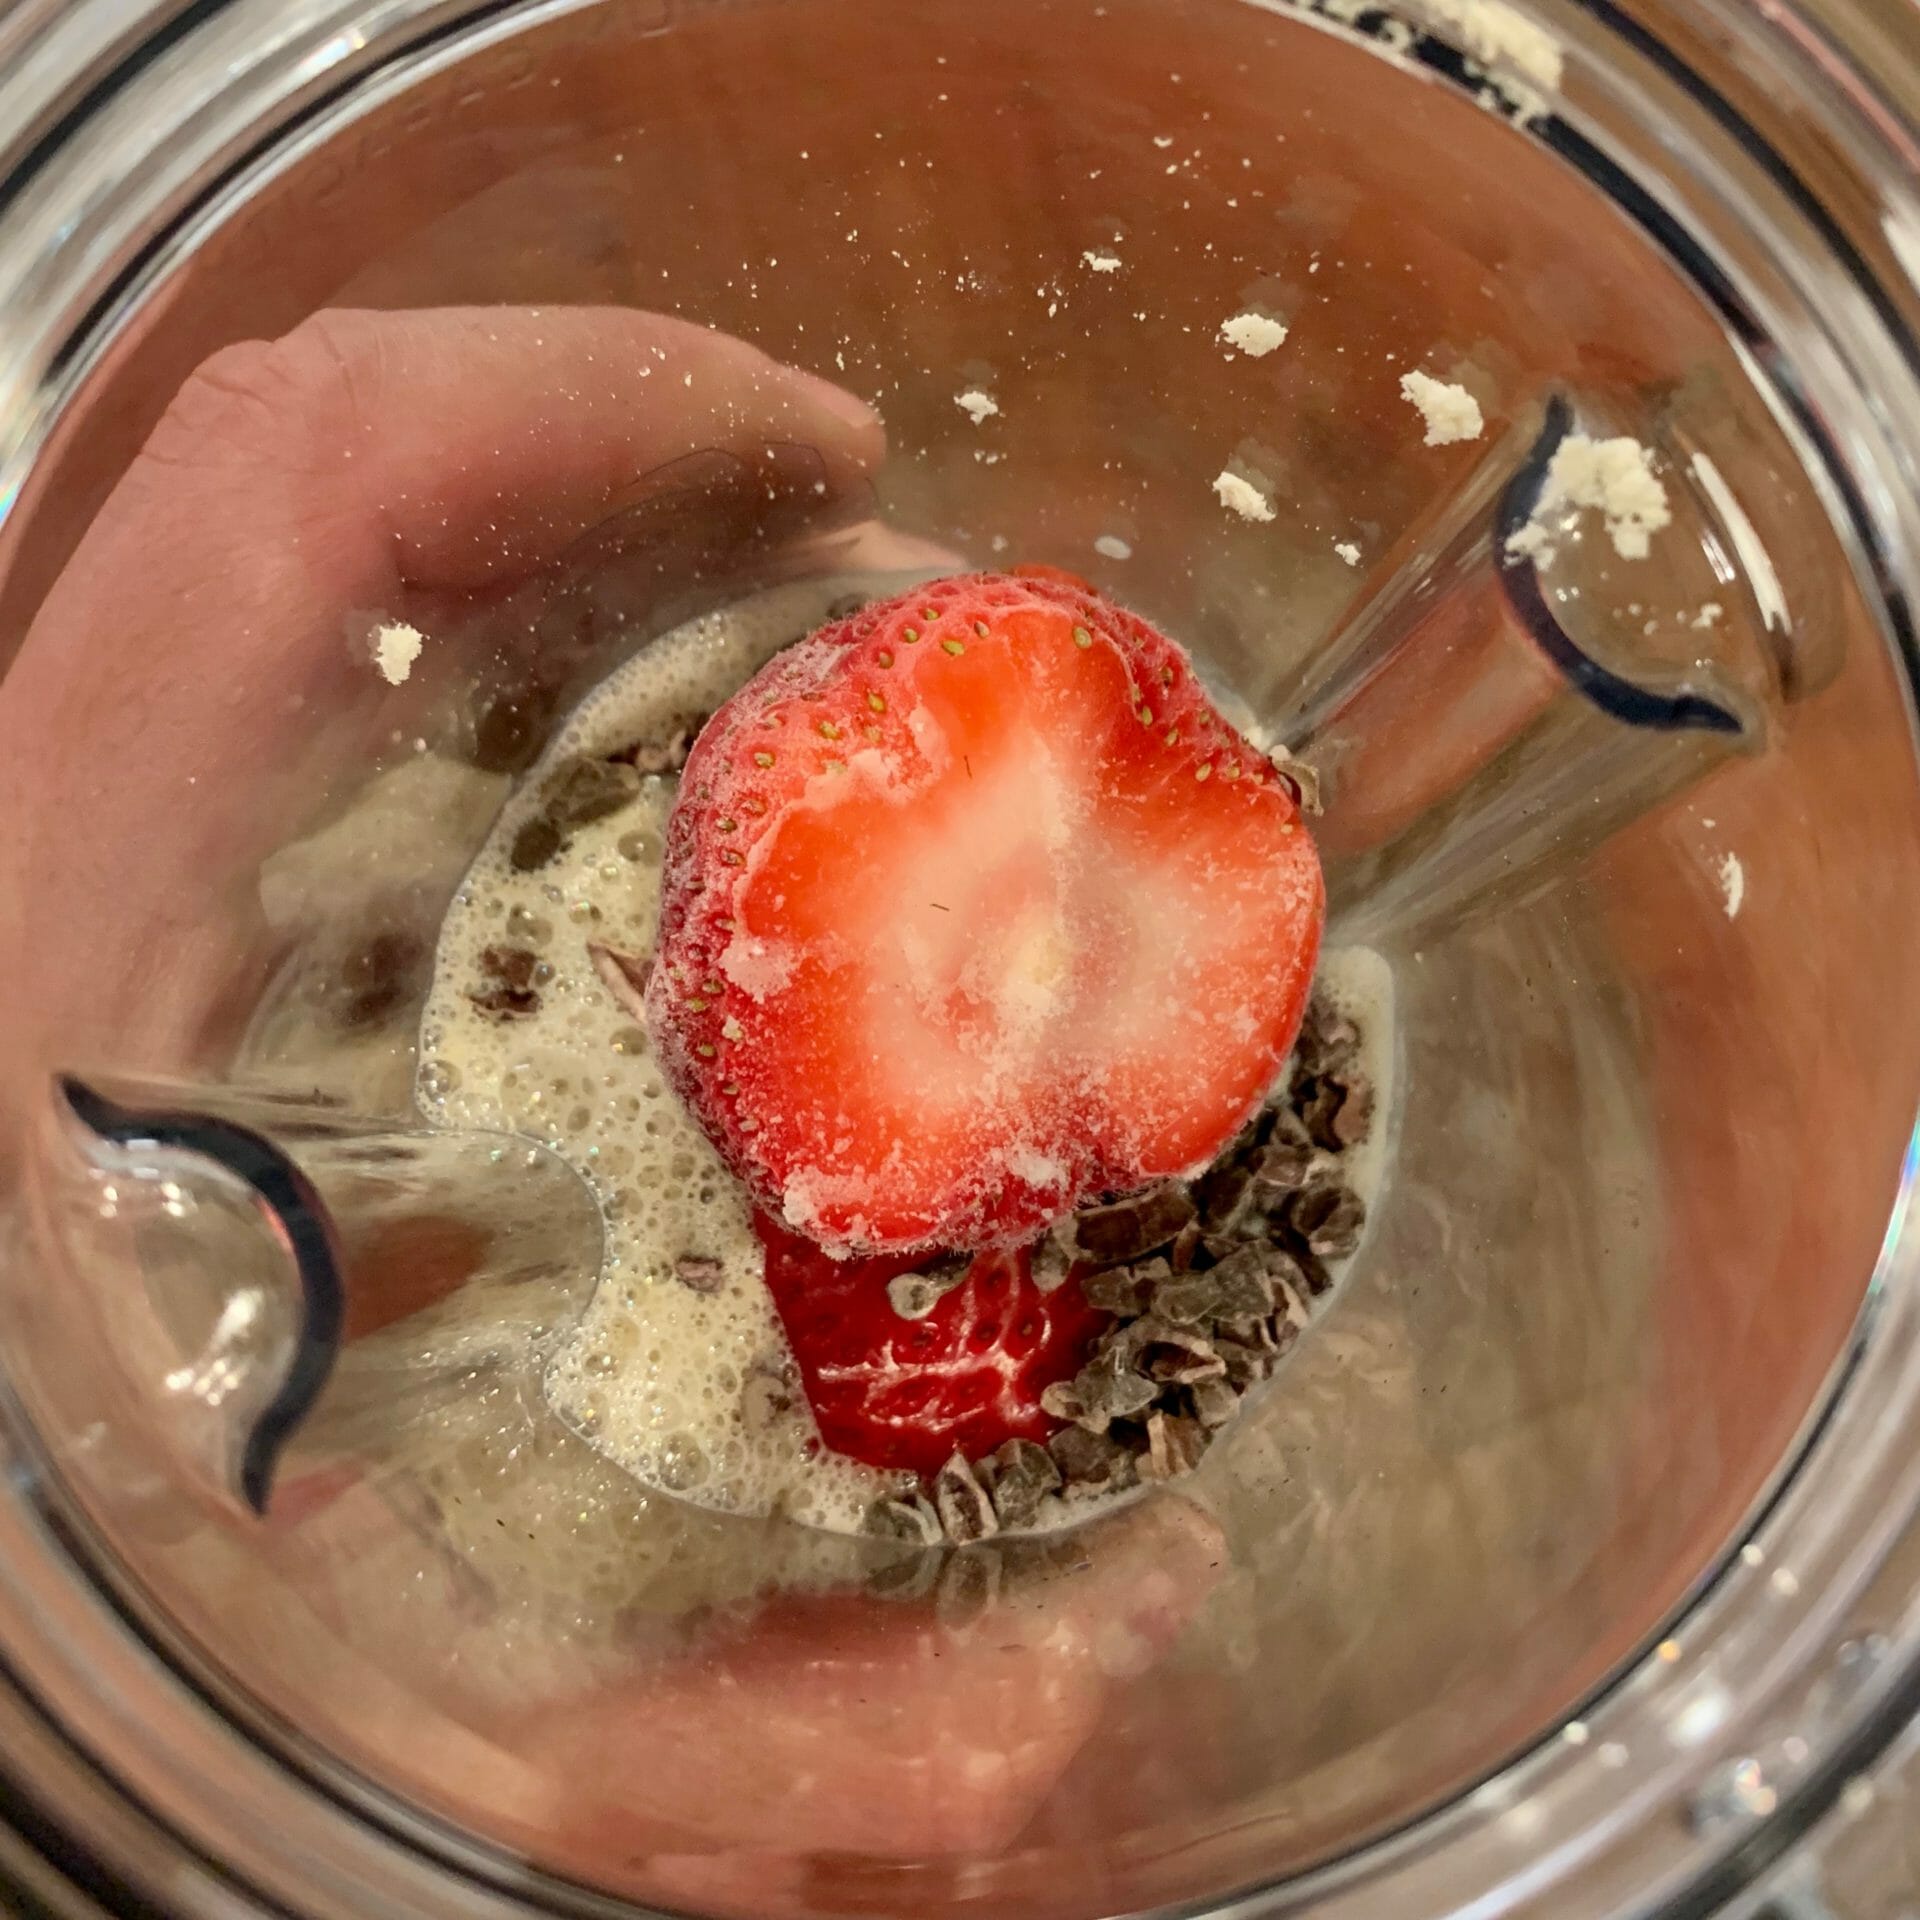 Keto meal replacement shake with strawberries and chocolate nips